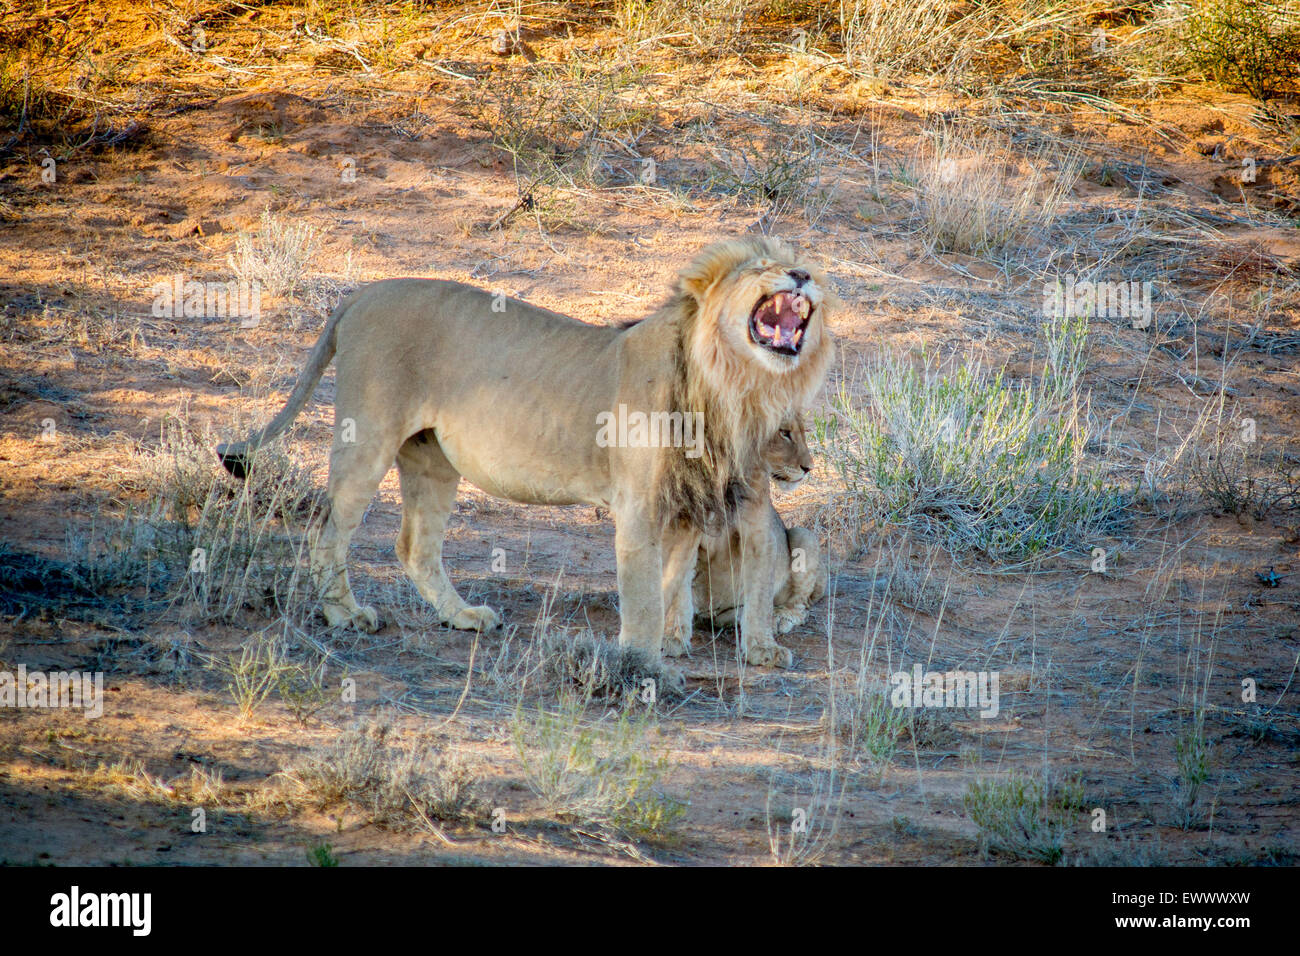 Kgalagadi Transfrontier Park, South Africa - Male lion (Panthera leo)and cub Stock Photo